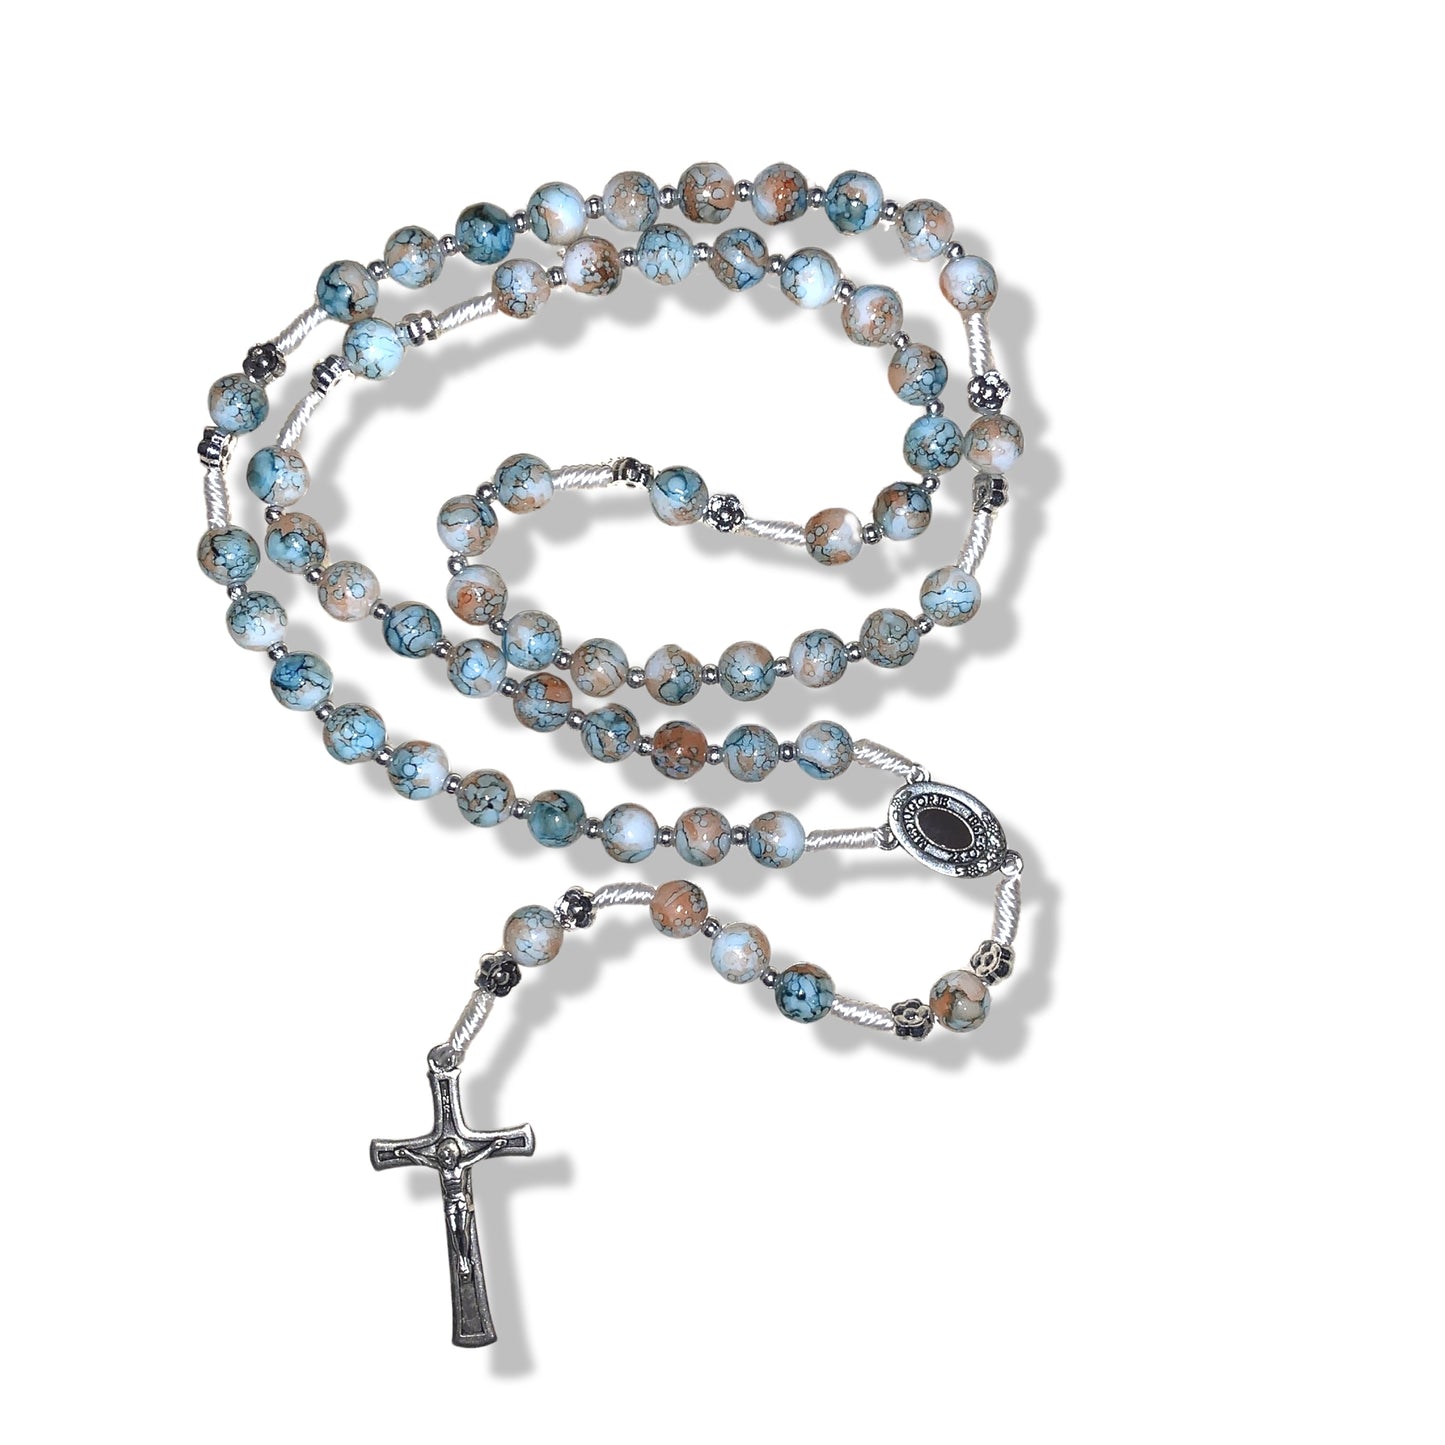 Marbled Queen of Peace Rosary with Soil of Assorted Colors